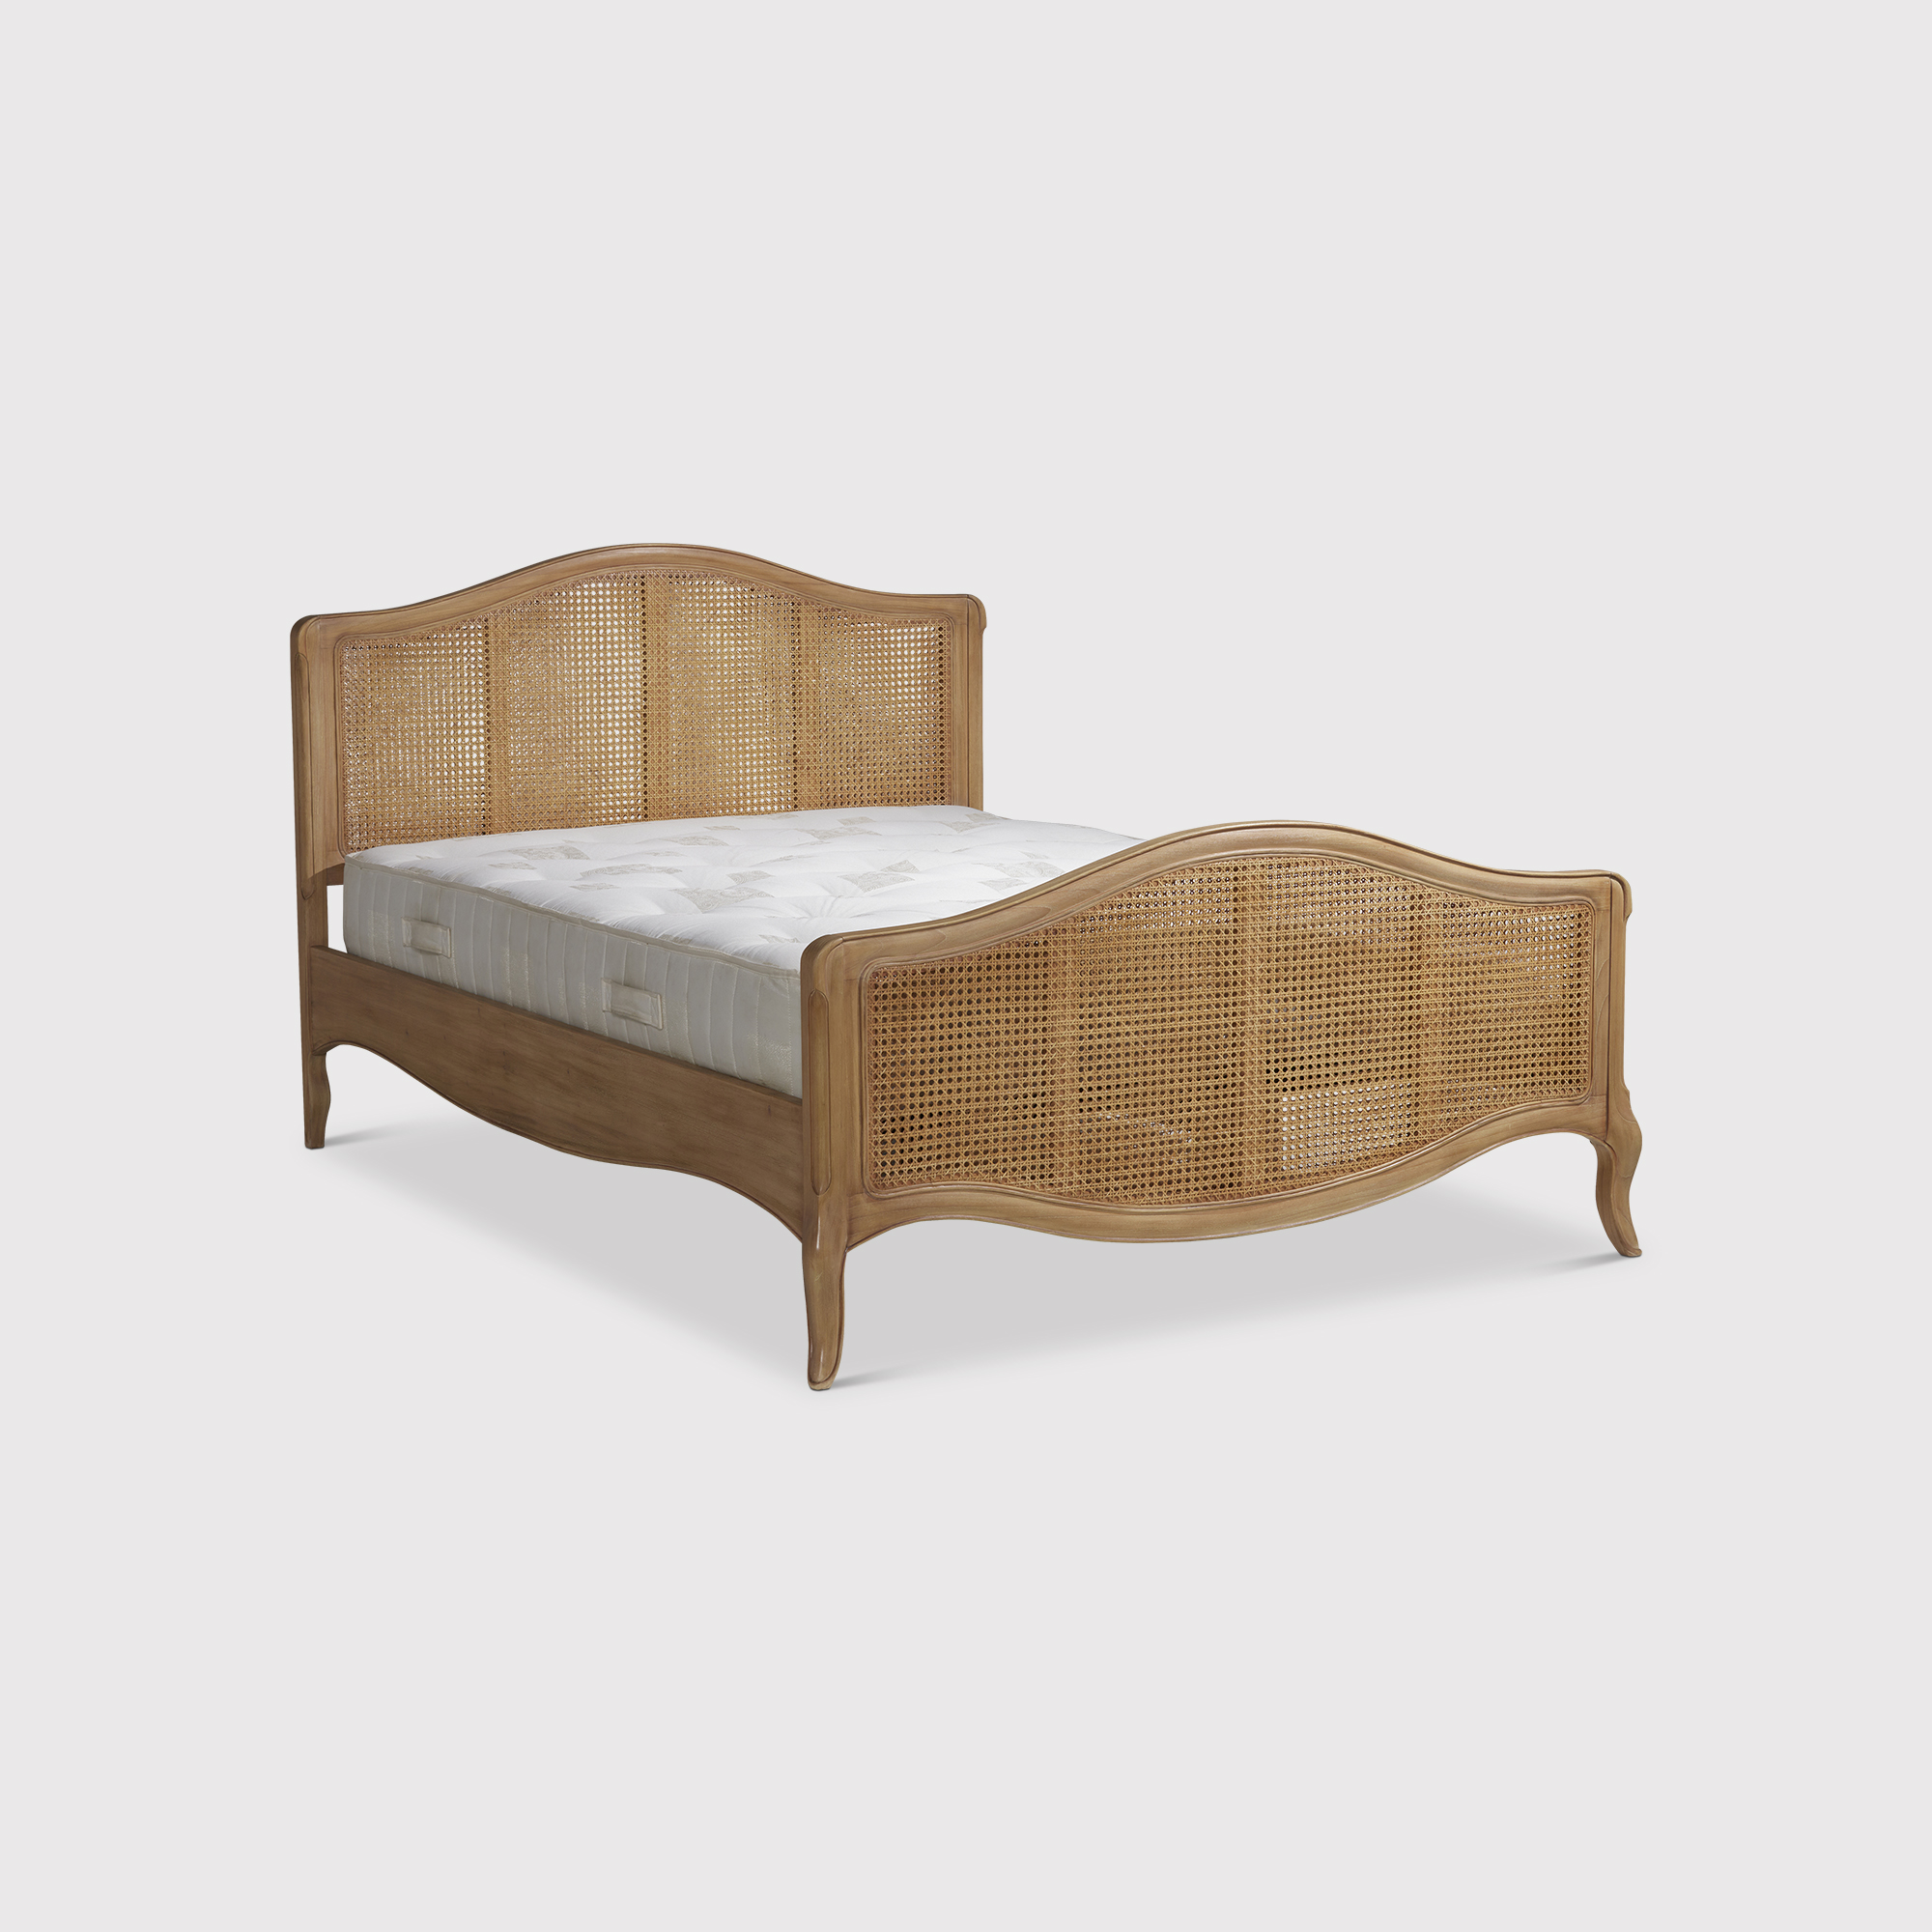 Cecile 180cm High Footend Bed, Neutral | Super King | Barker & Stonehouse